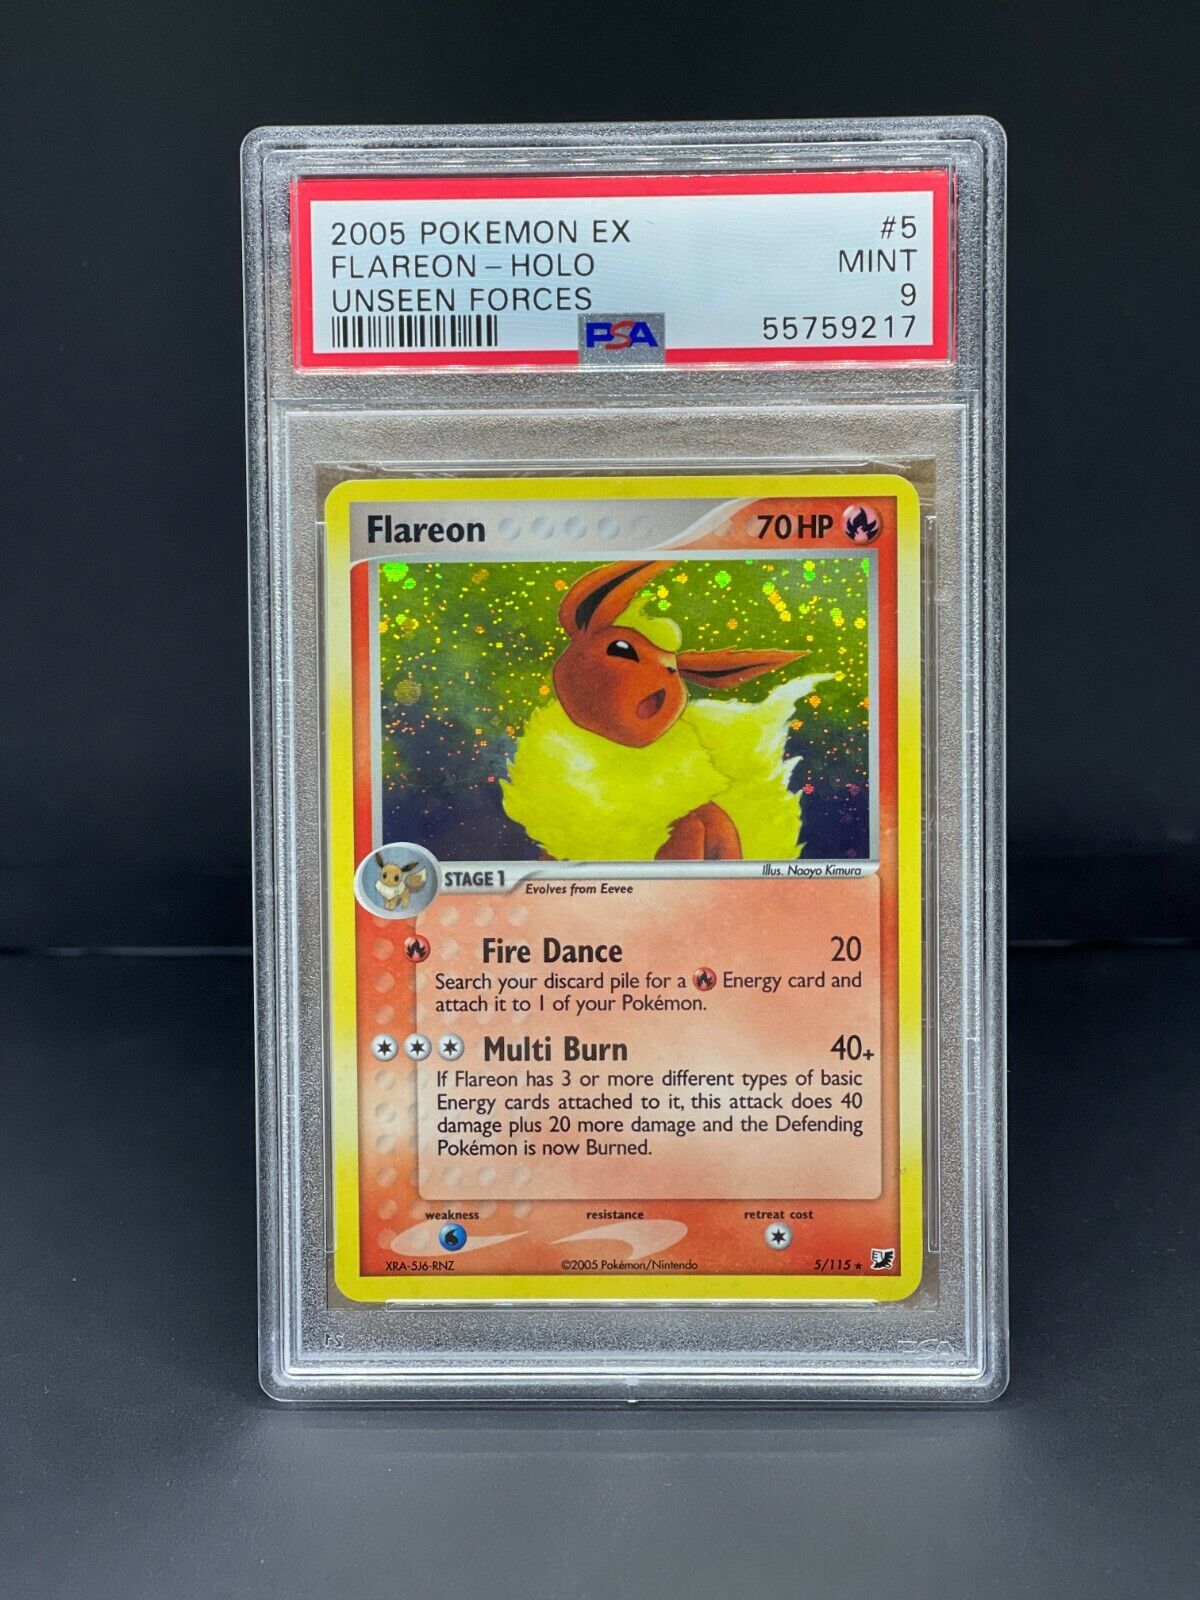 Pokemon Ex Unseen Forces Flareon Holo PSA 9 MINT #5 - Graded Card English